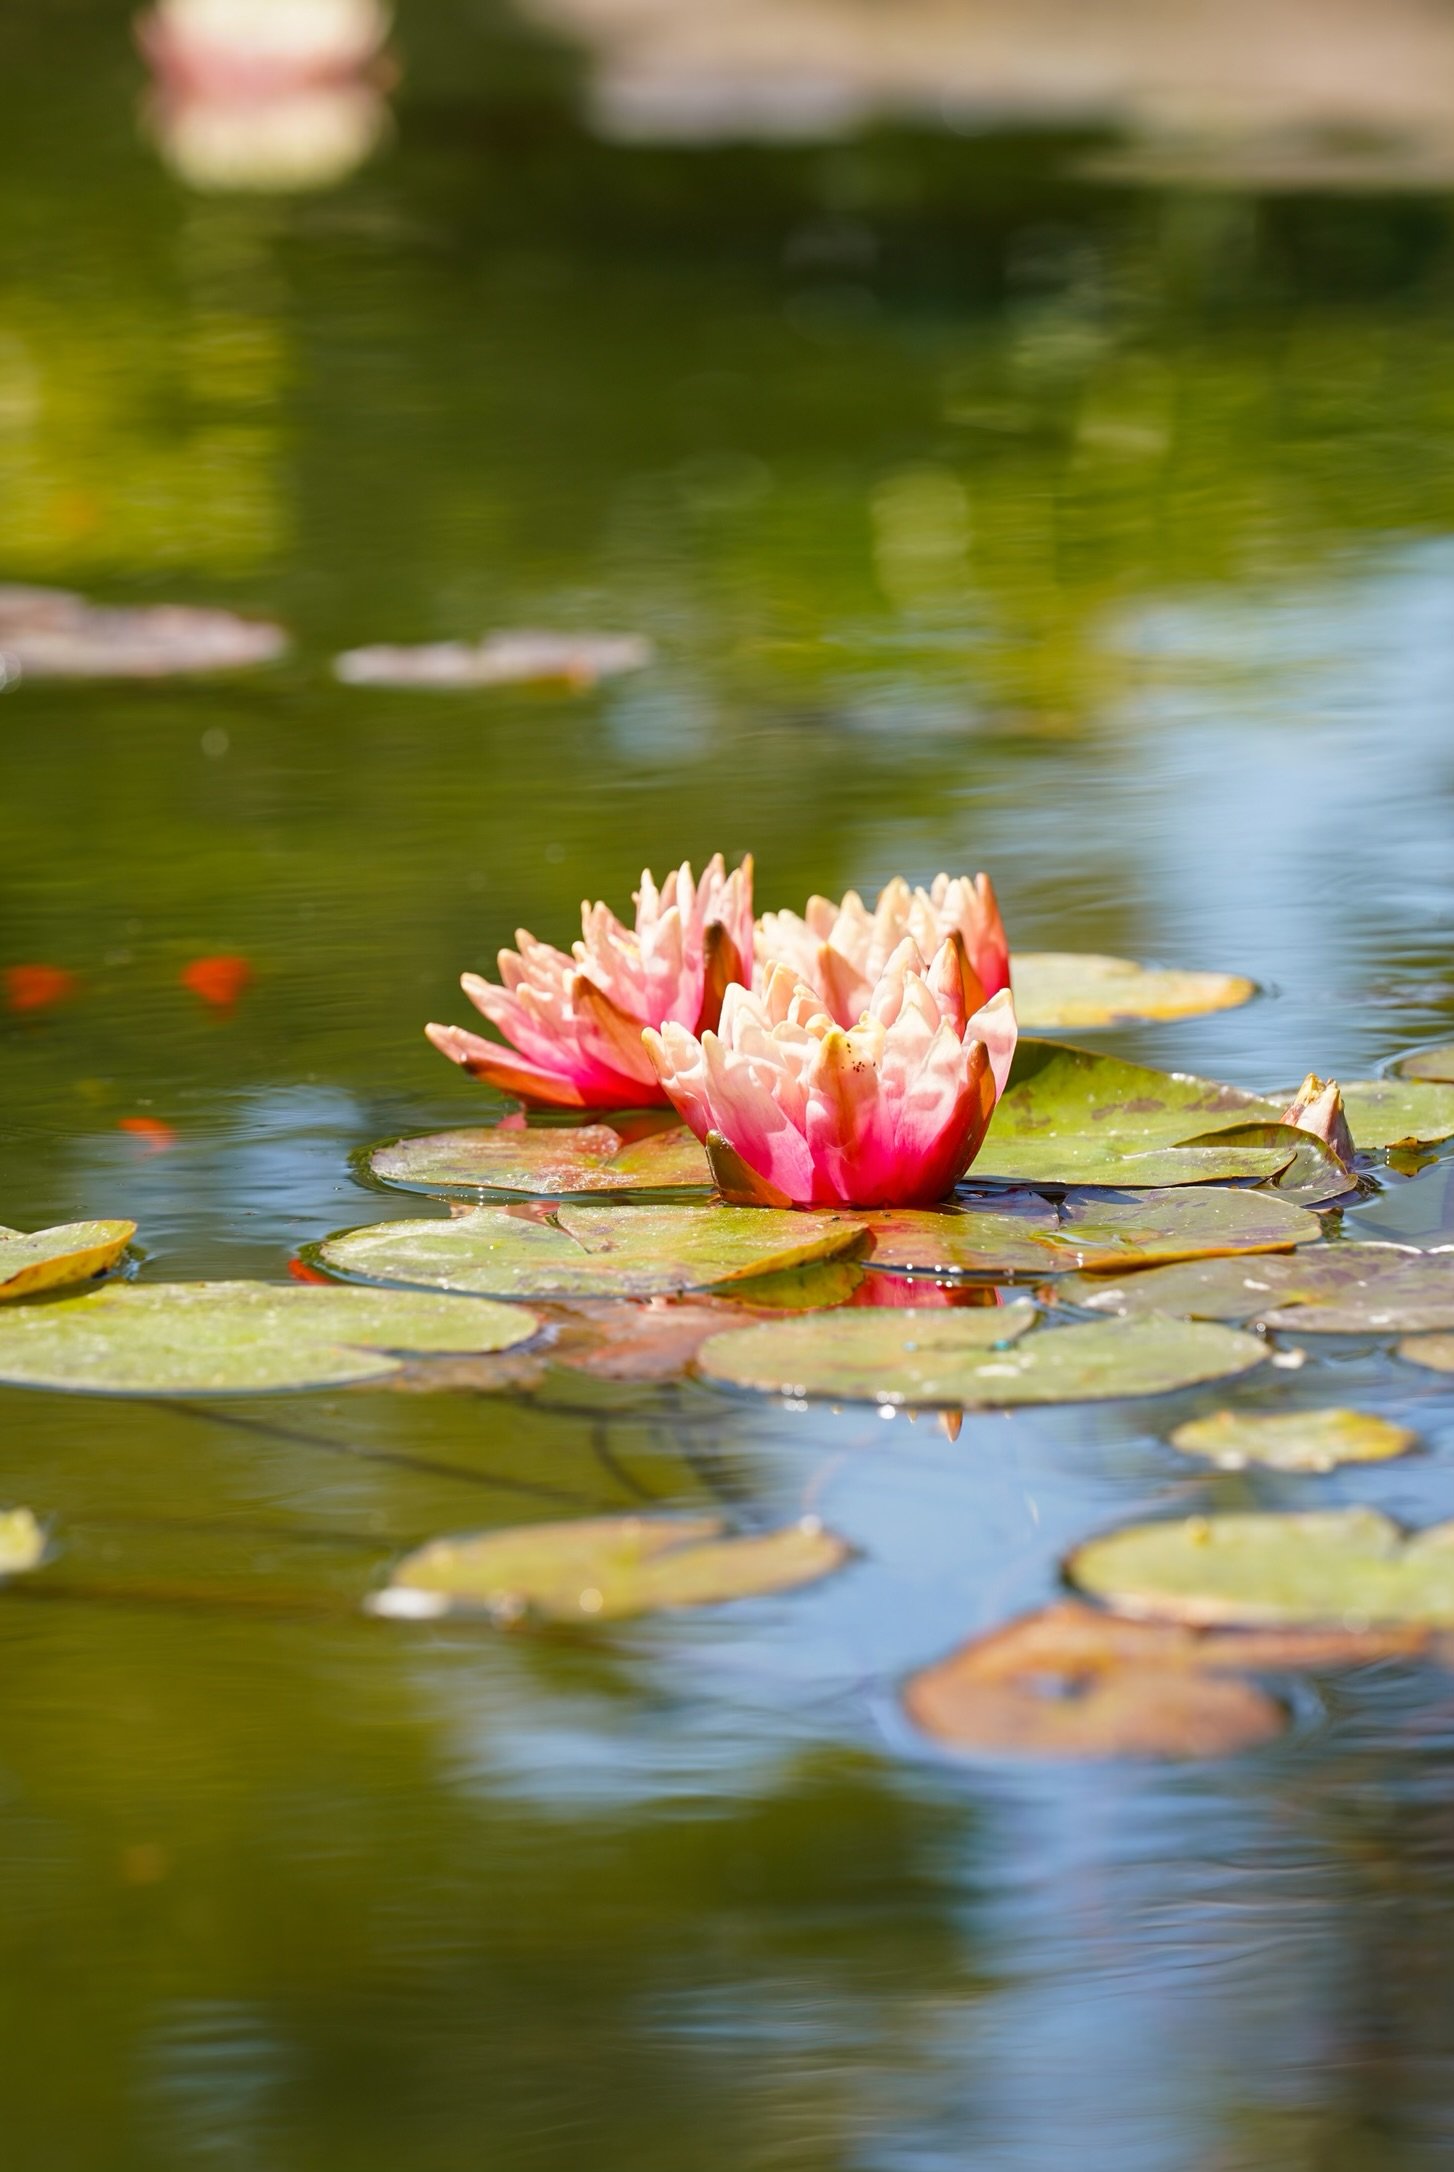  Close up photo of water lilies. Photo by Kimberly Carrillo 